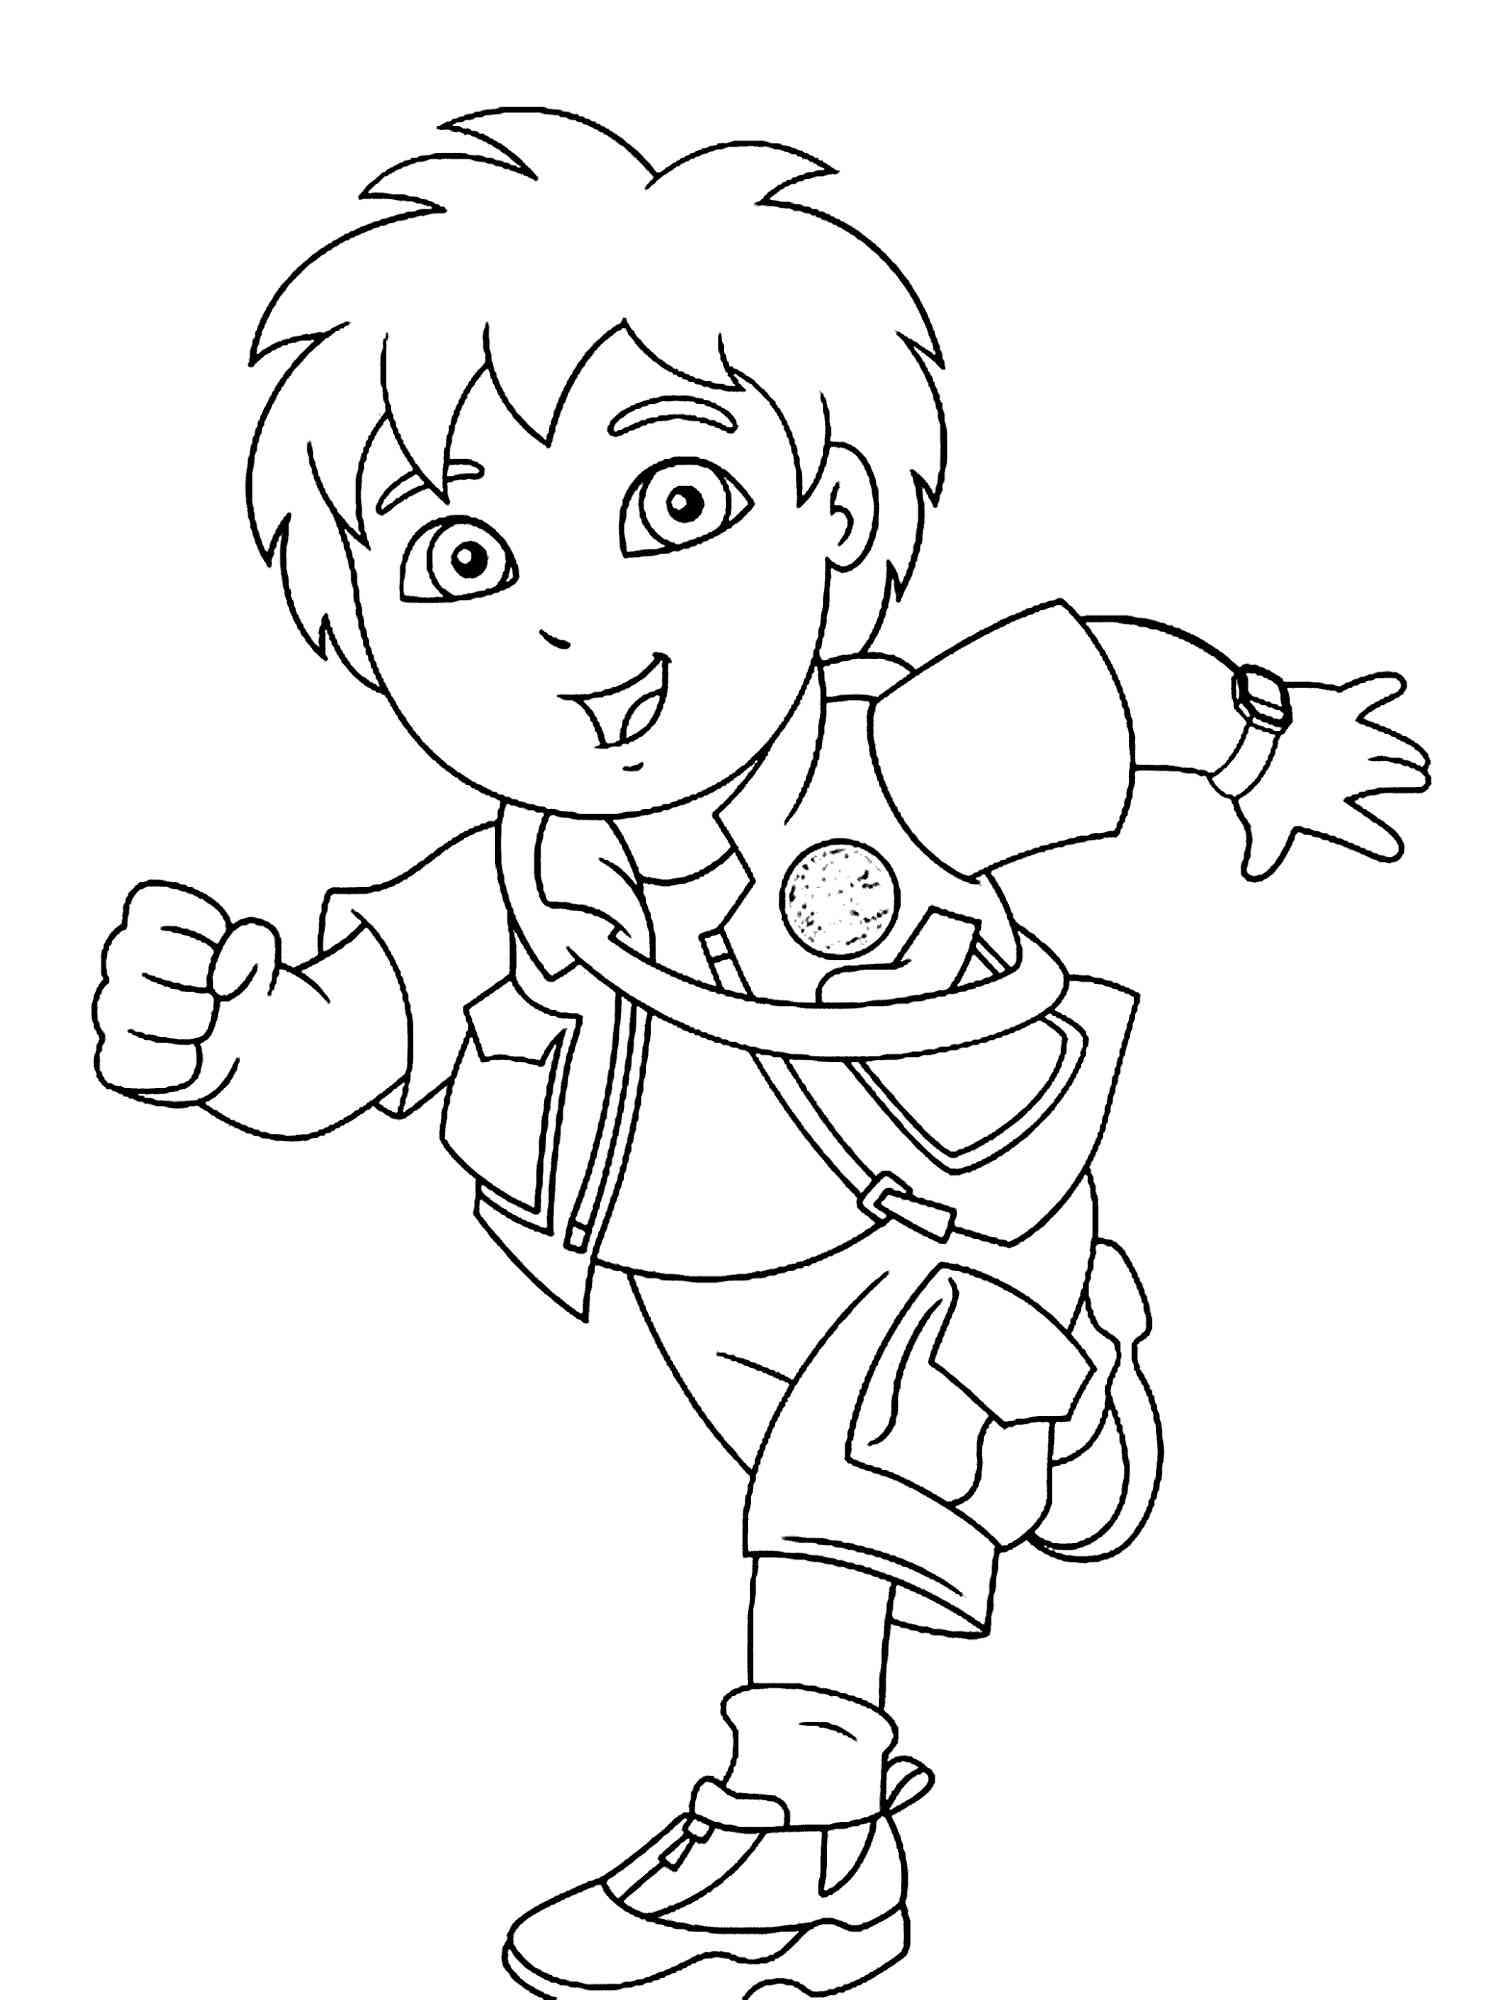 Diego 4 coloring page